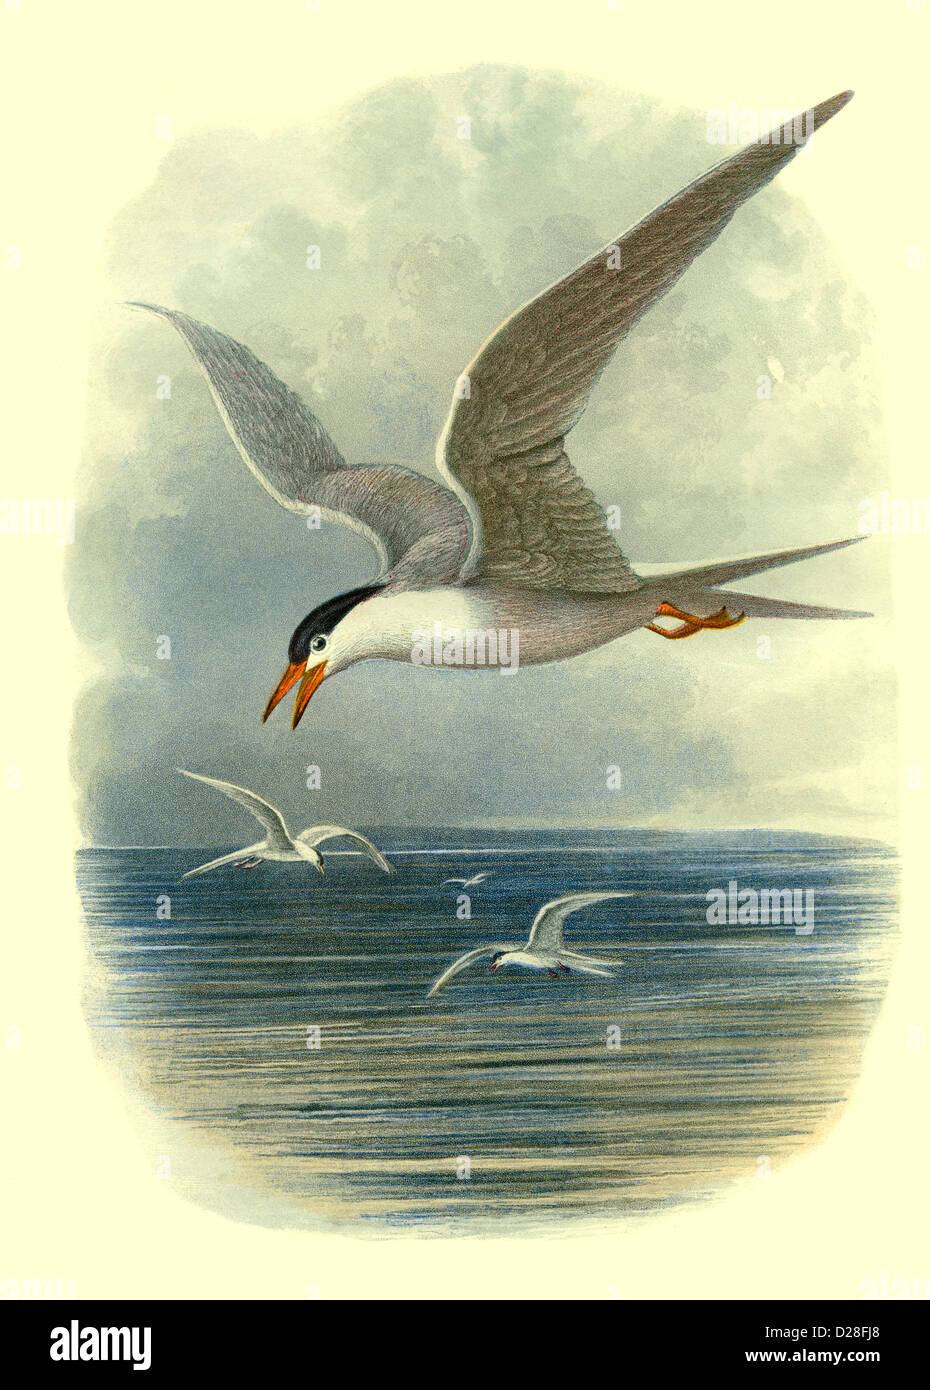 'Common Tern' GULL High resolution enhanced scan of antiquarian Victorian colour plate from 1860's Cassell's Book of Birds 'Common Tern' Stock Photo